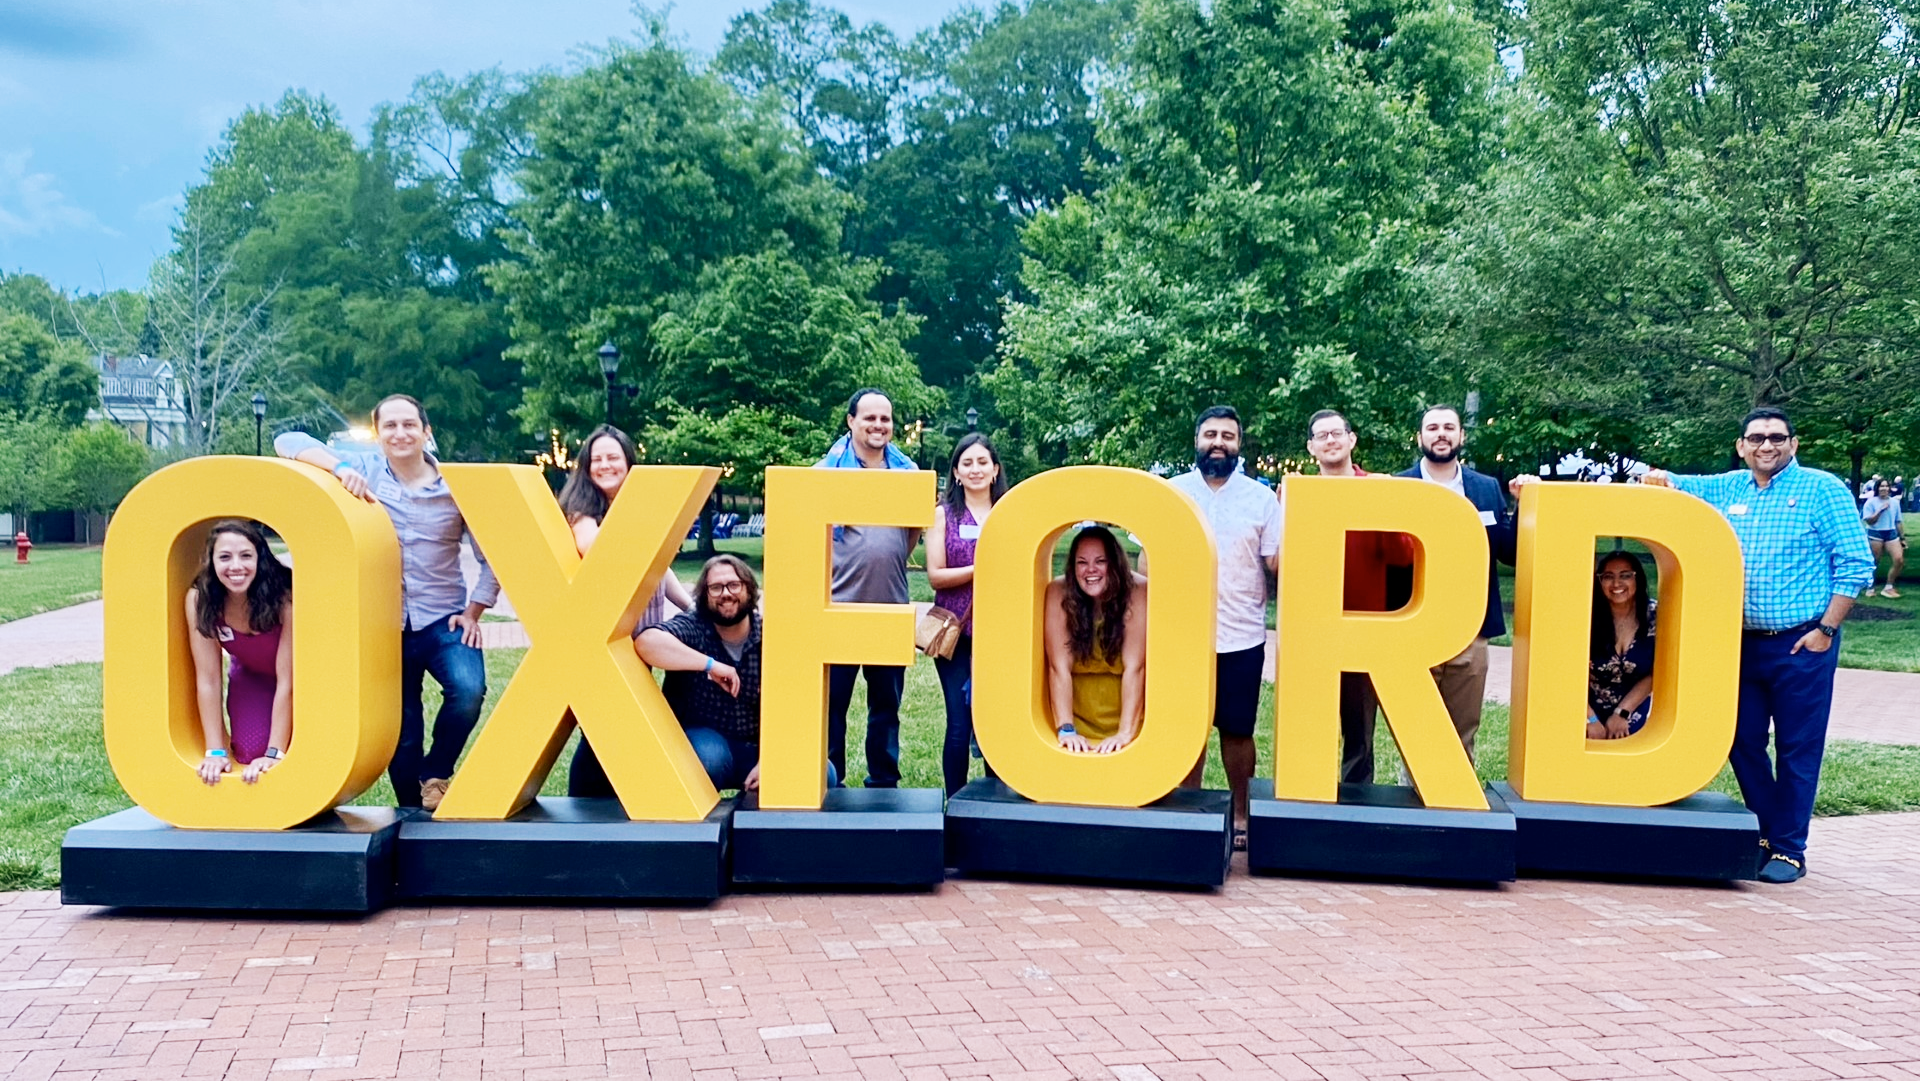 Alumni with Oxford Letters